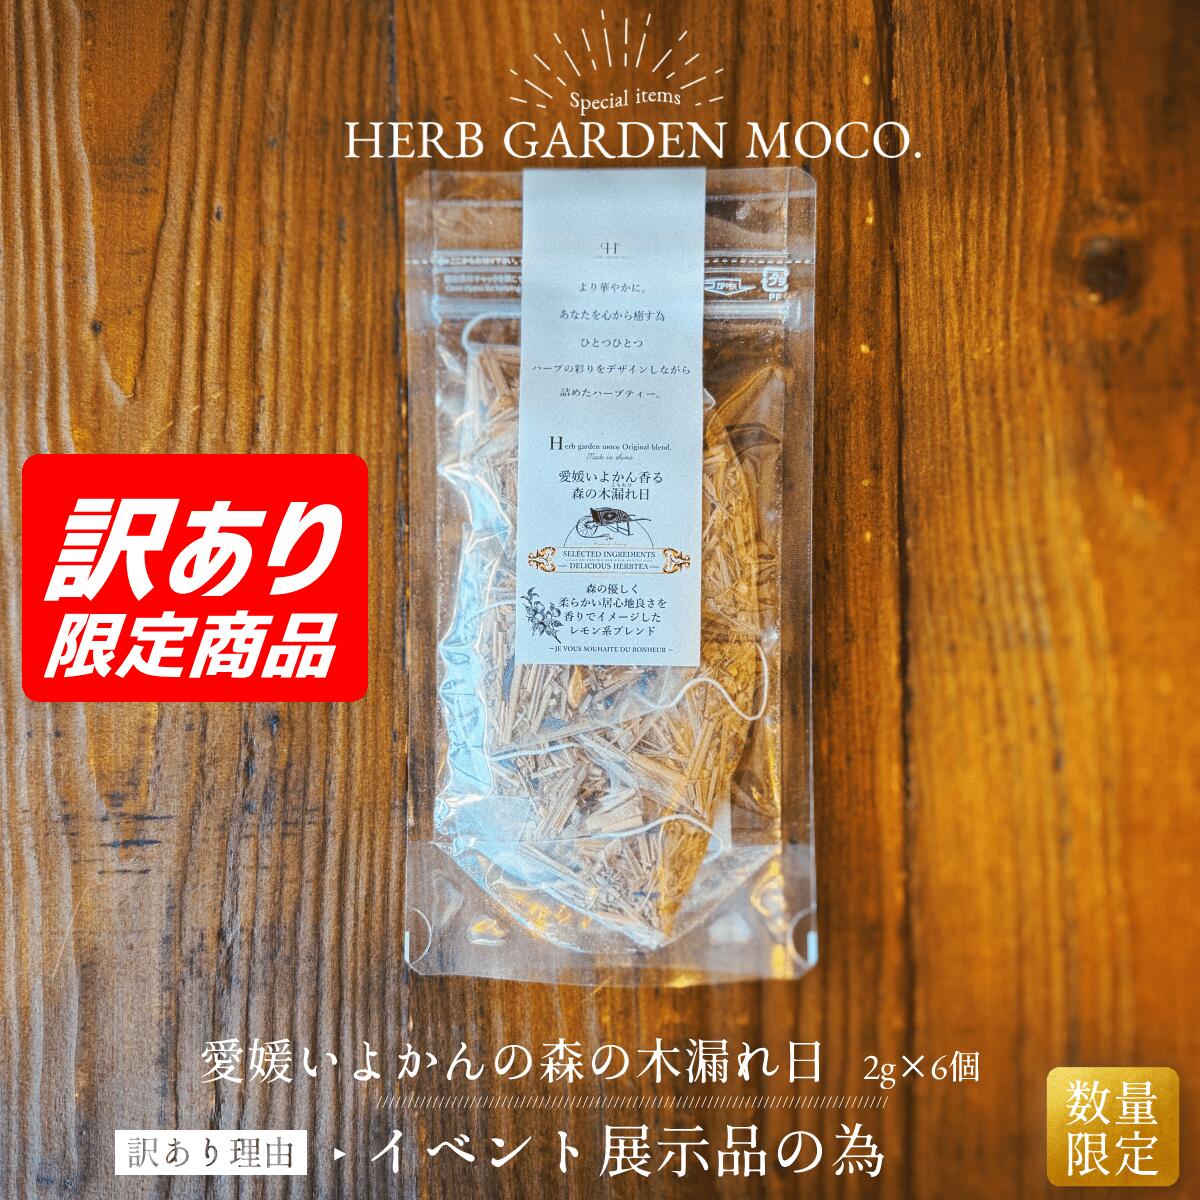 【OUTLET】【日焼けあり】【POPUP展示品】愛媛いよかんの森の木漏れ日(2g×6個入）【賞味期限】10月31日